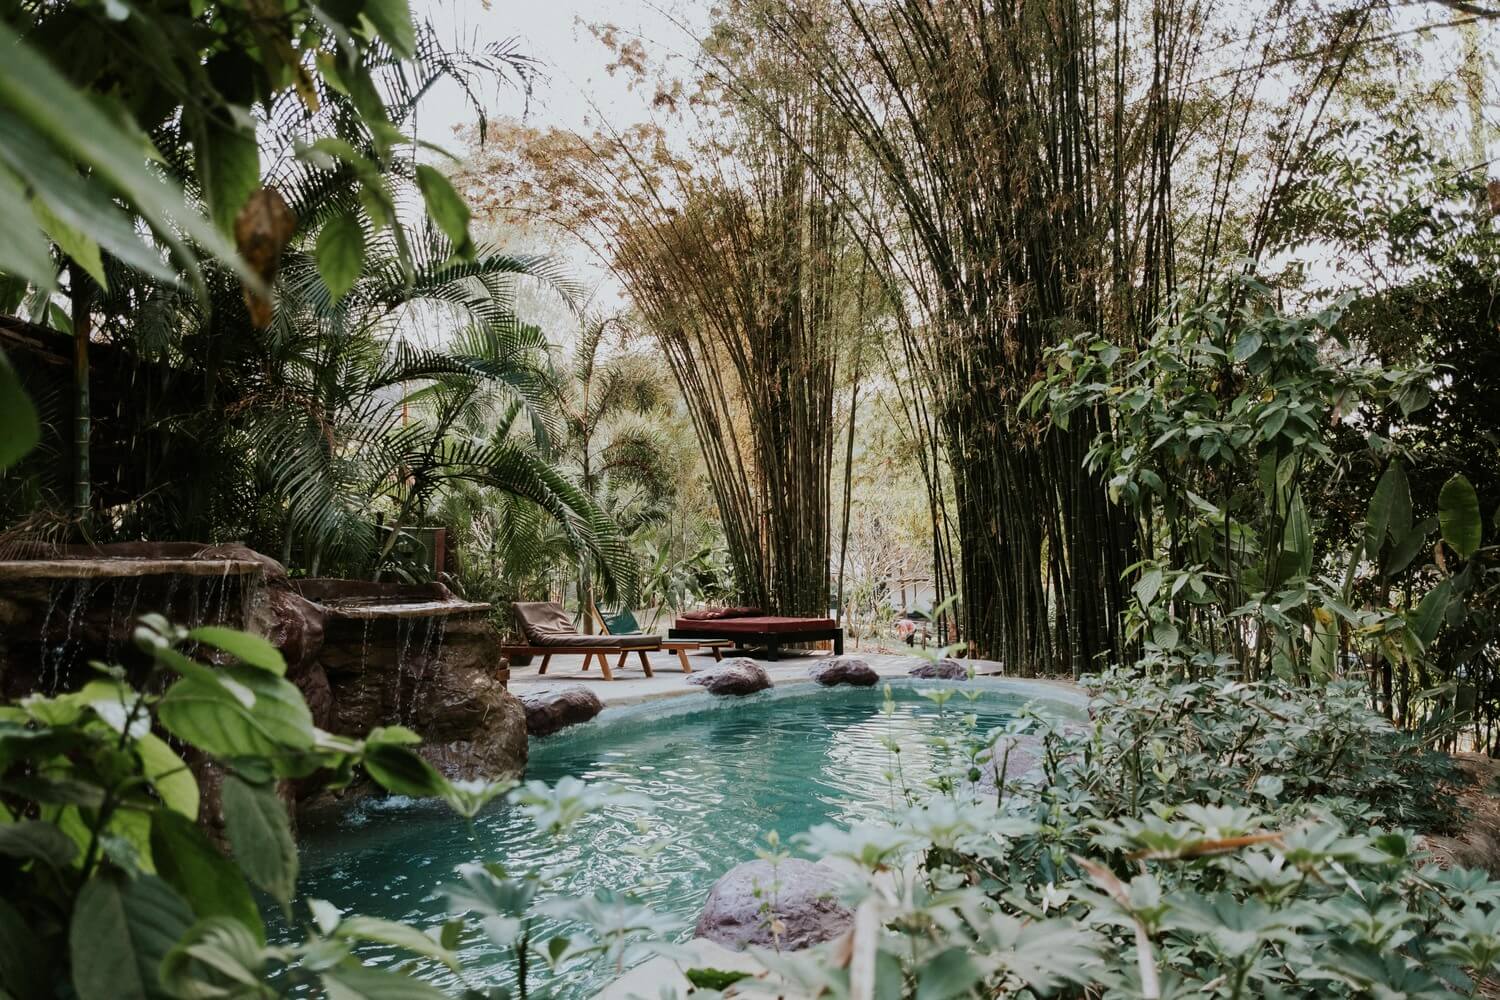 In Luang Prabang, a pool nestled within a lush landscape of trees and bamboo creates a serene oasis for relaxation.